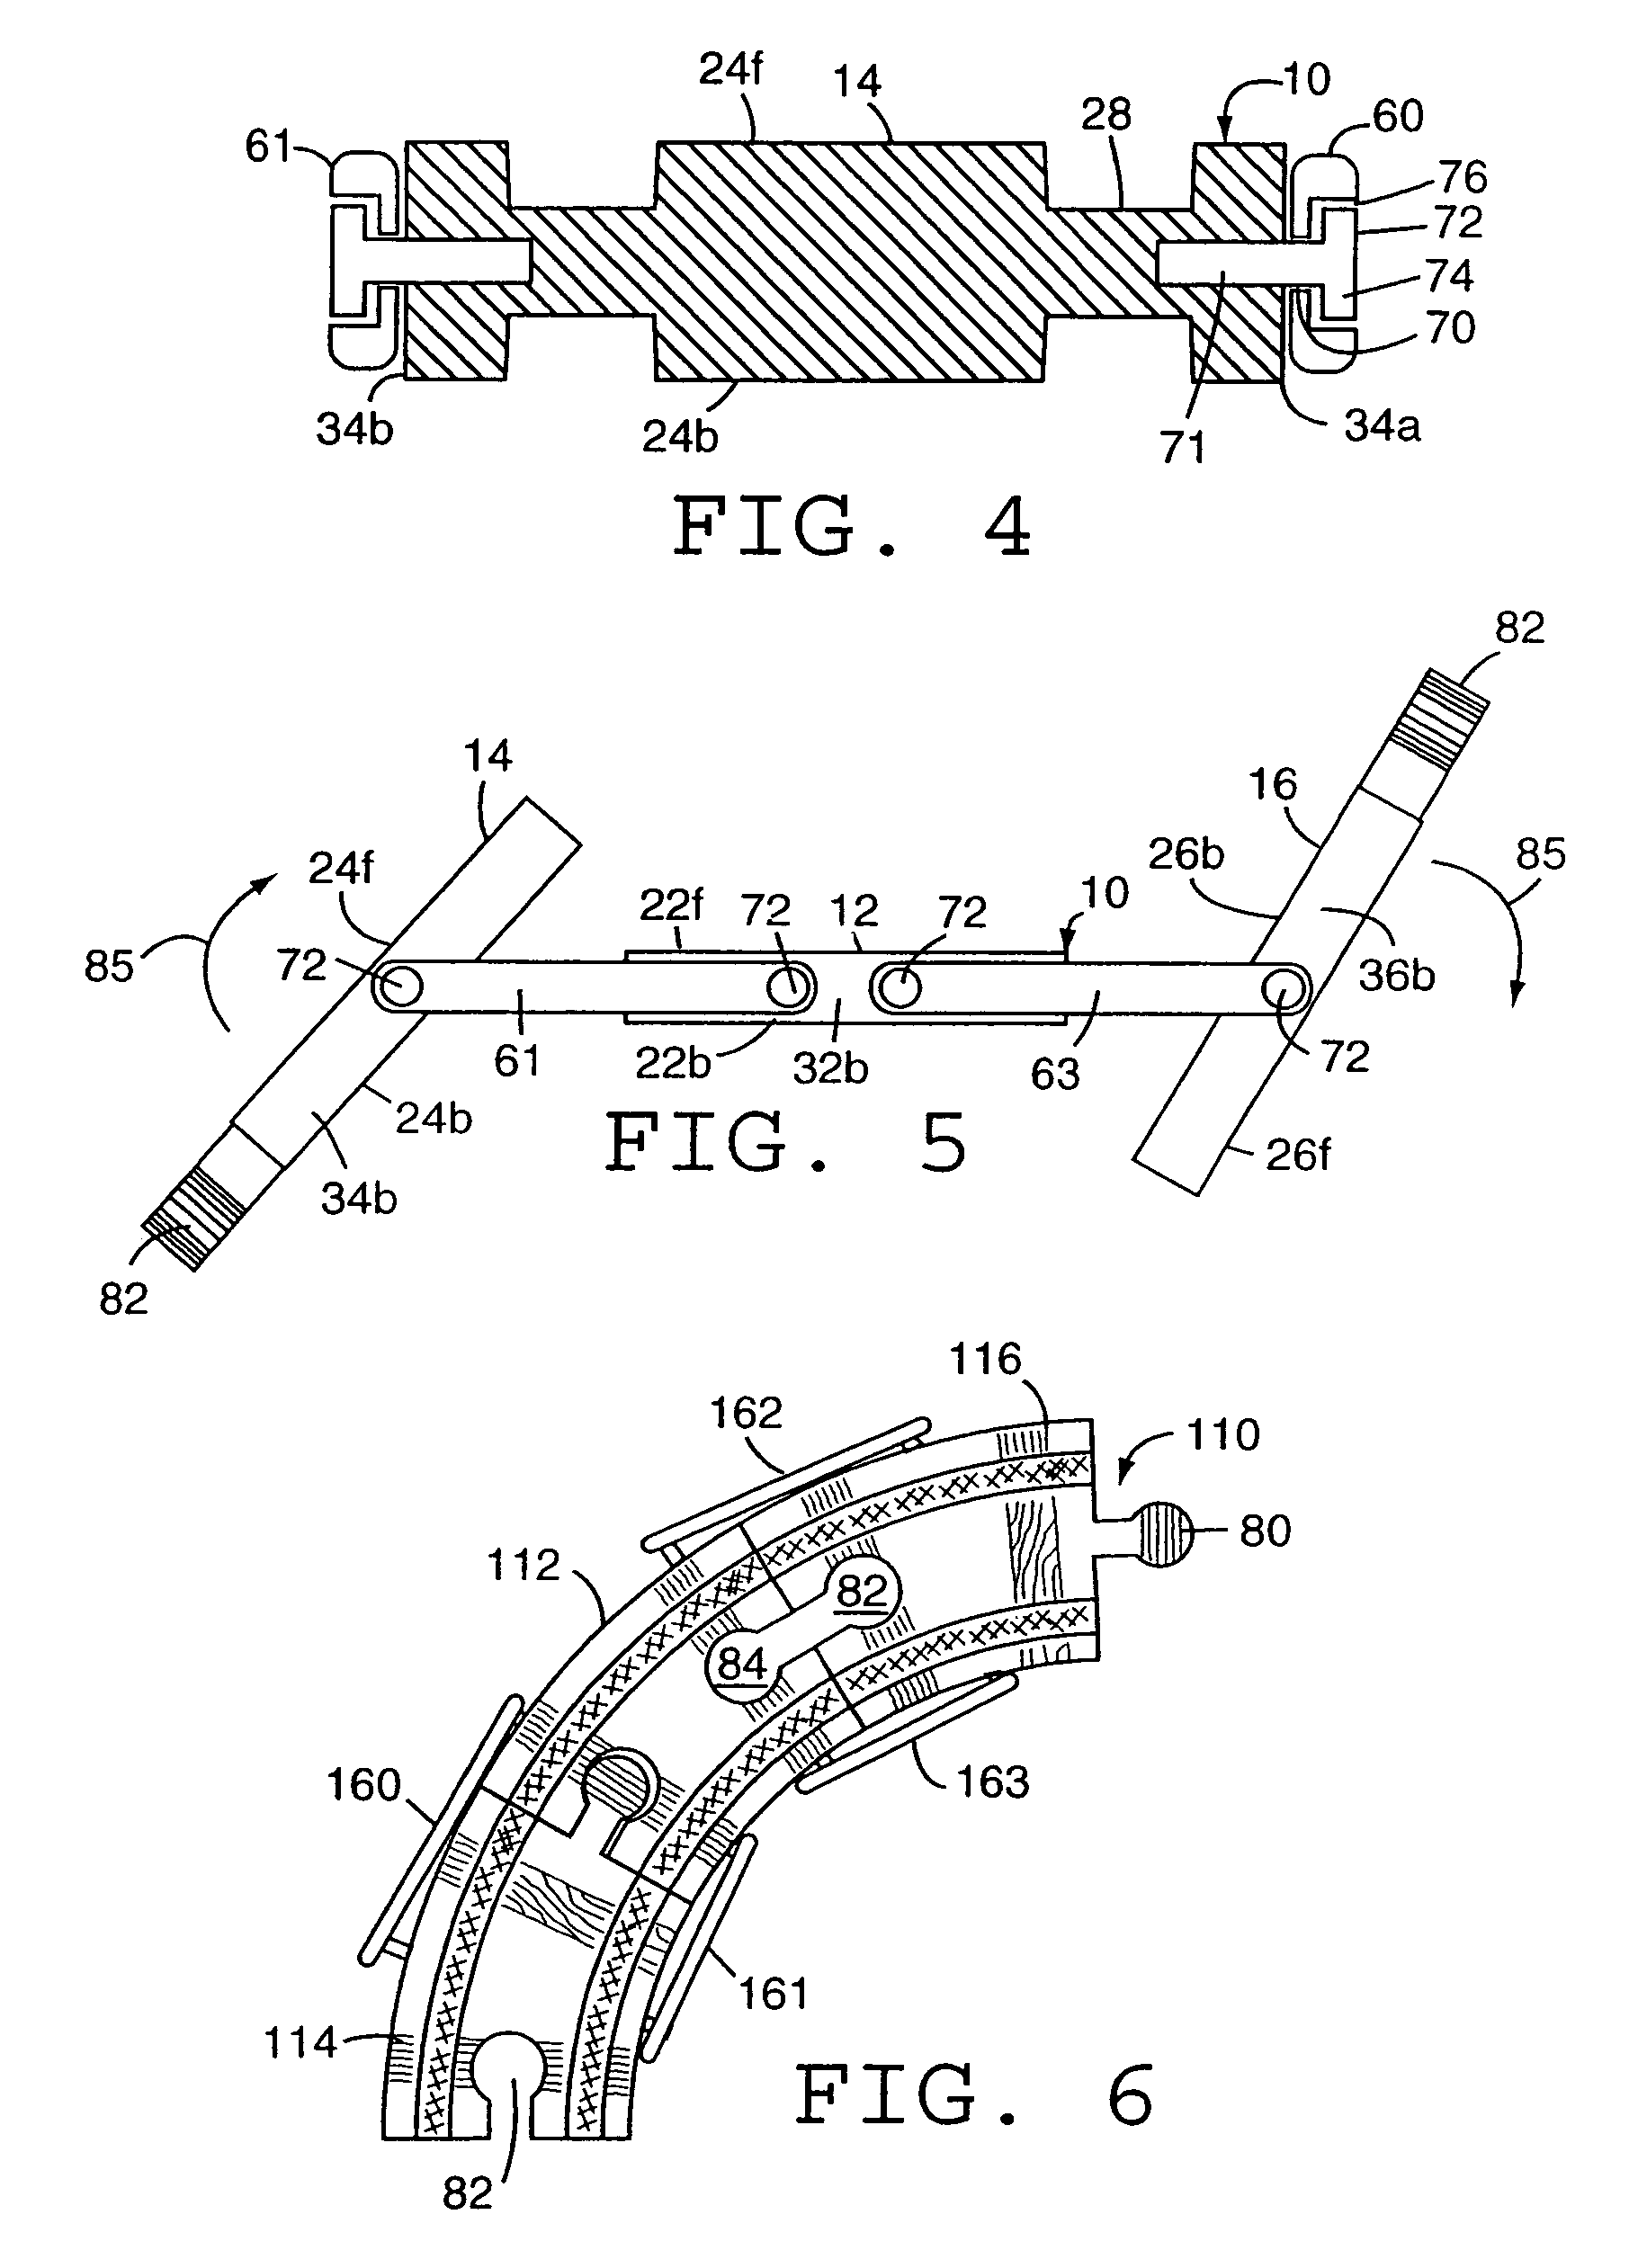 Configurable track for toy vehicles